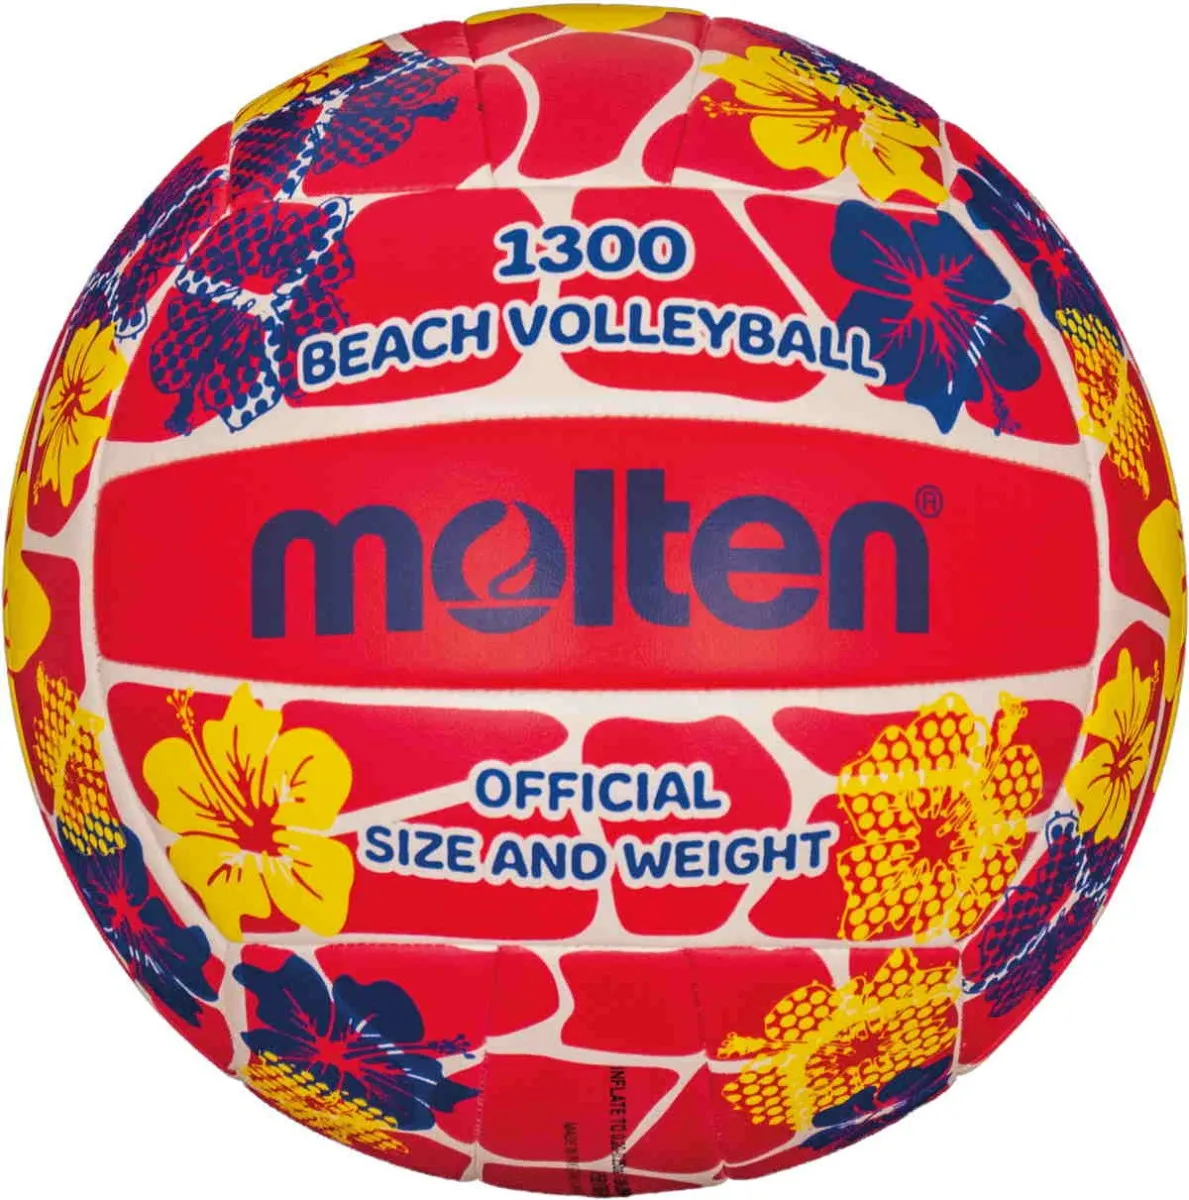 Beach volleyball red with flower design